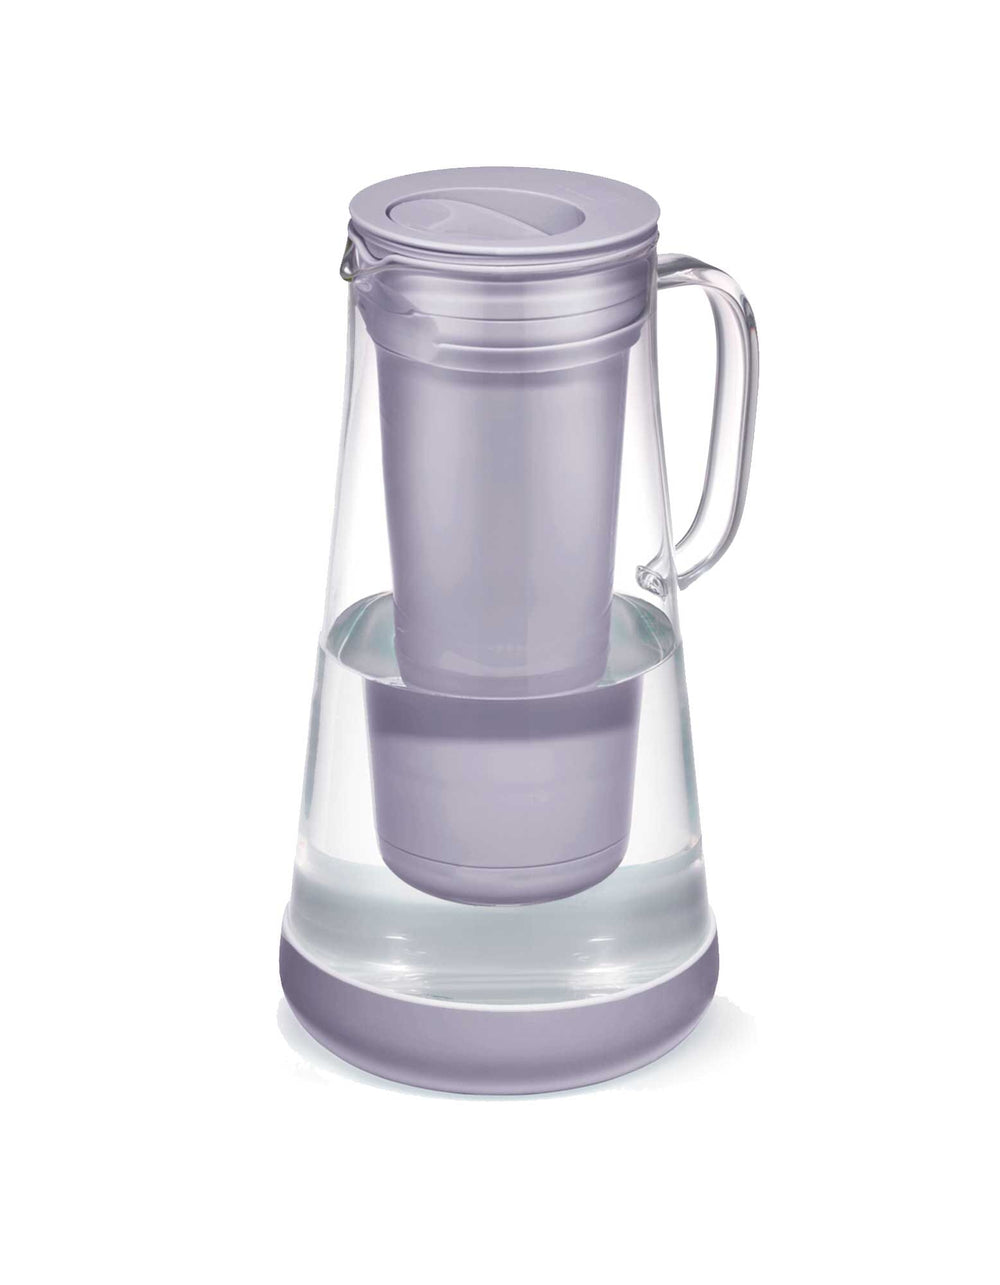 What is a blender cup and how does it differ from a regular cup